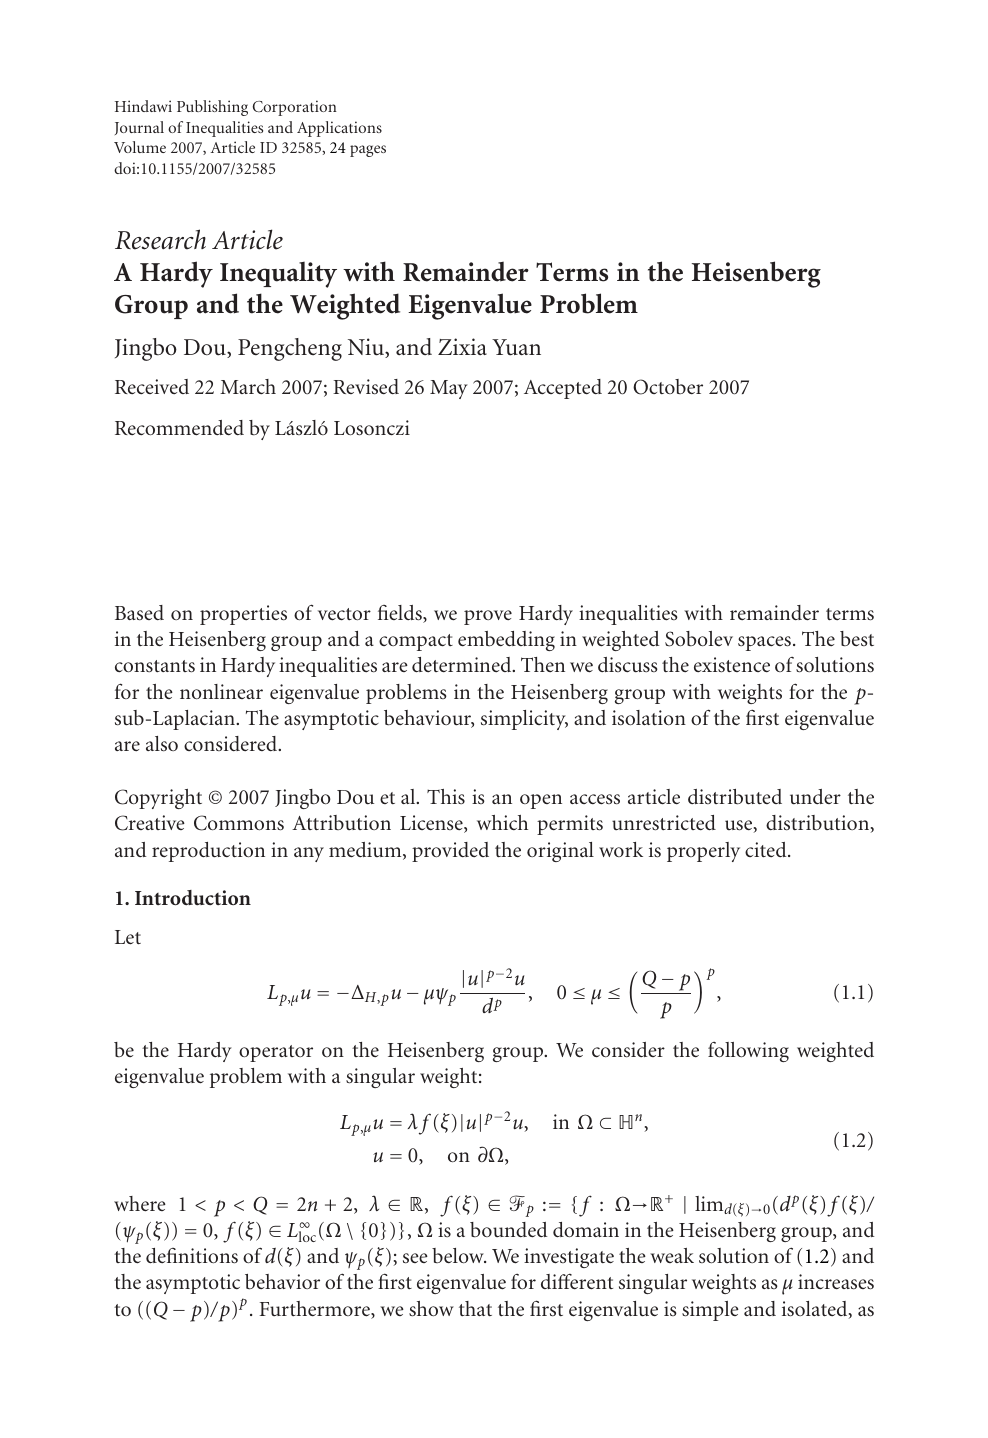 A Hardy Inequality With Remainder Terms In The Heisenberg Group And The Weighted Eigenvalue Problem Topic Of Research Paper In Mathematics Download Scholarly Article Pdf And Read For Free On Cyberleninka